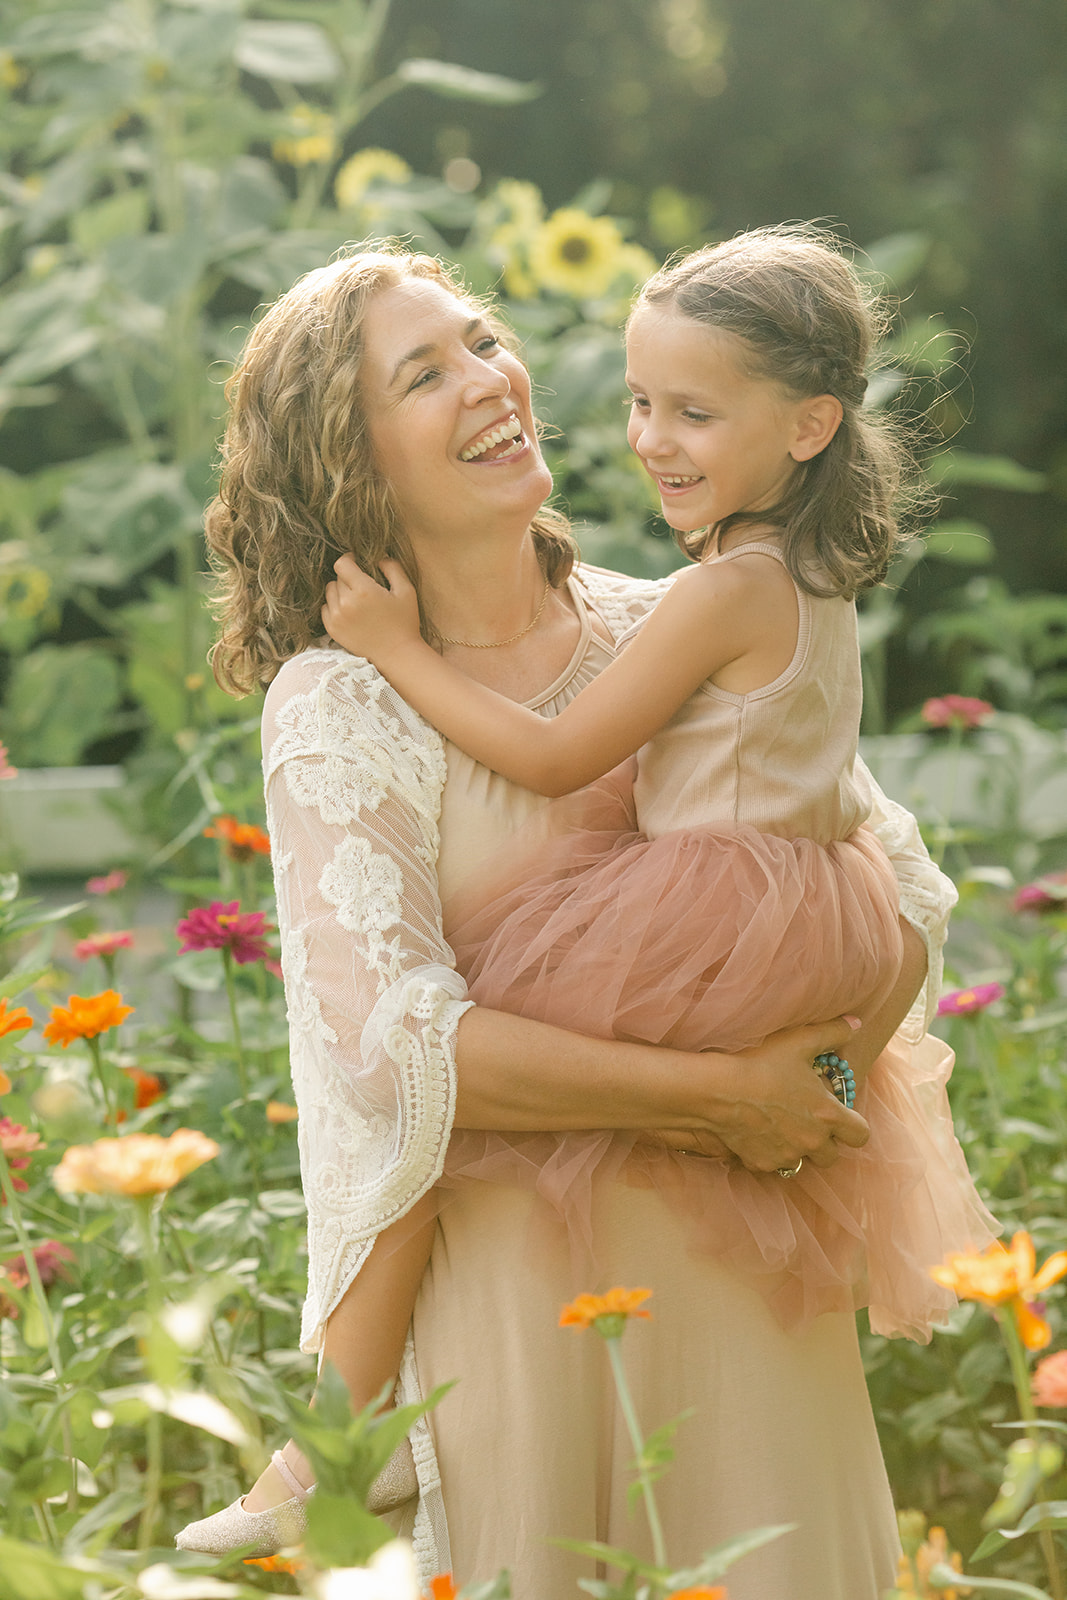 outdoor motherhood minis in garden. photographed in nashville photographer. mom and daughter